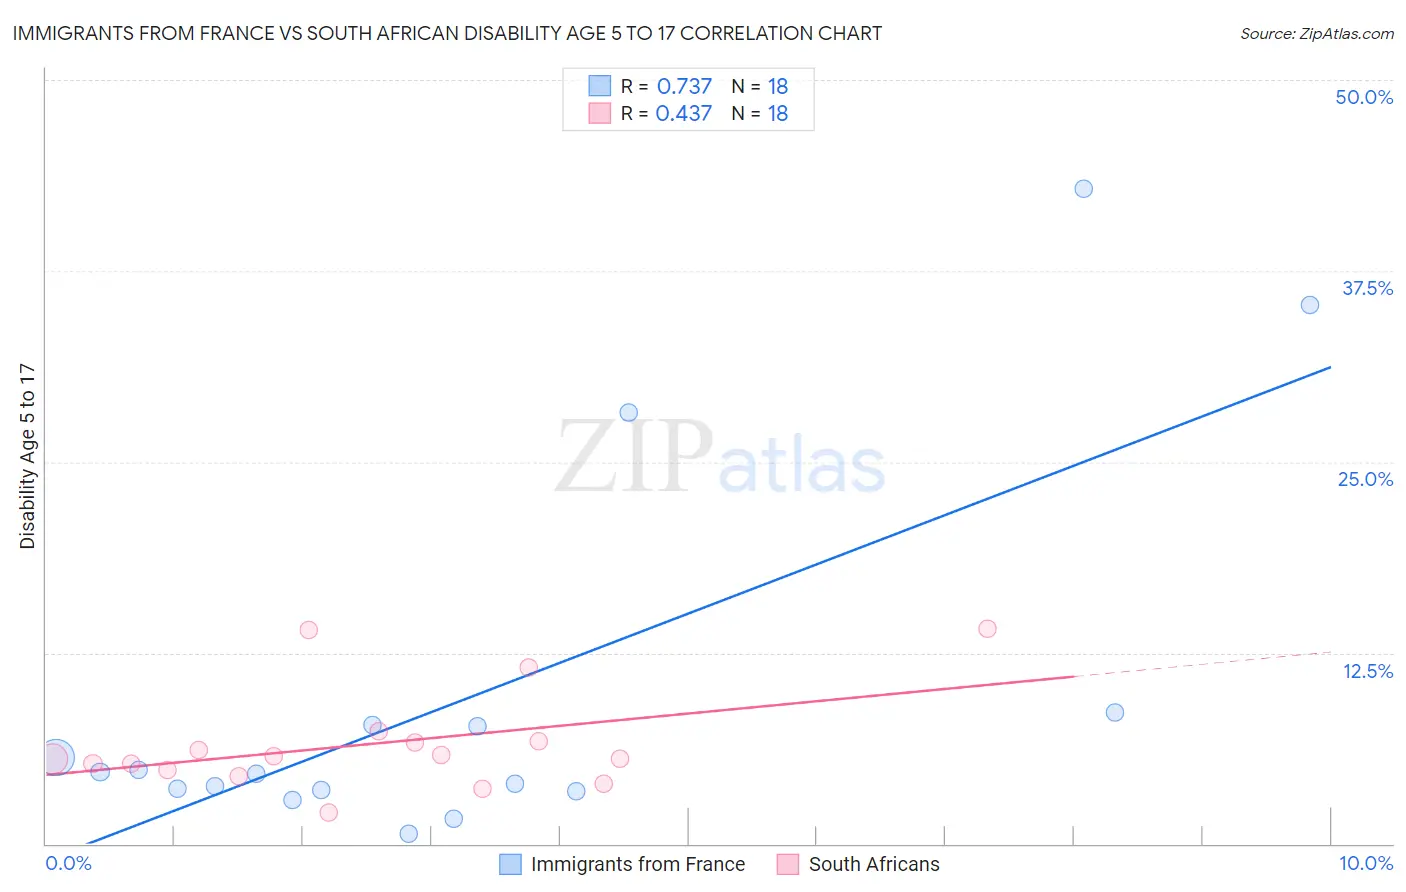 Immigrants from France vs South African Disability Age 5 to 17